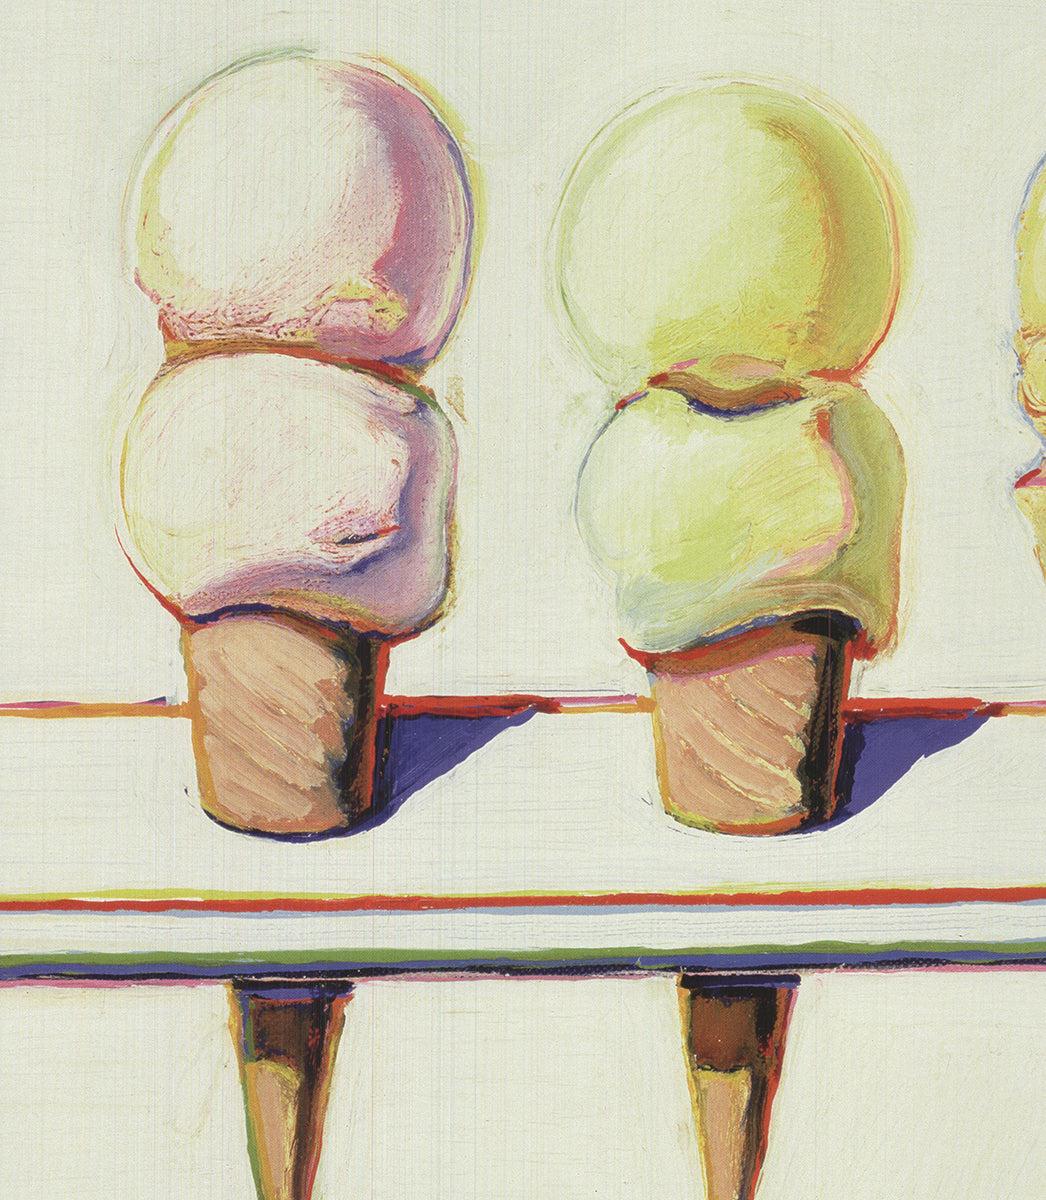 Wayne Thiebaud 'Four Ice Cream Cones' 2010- Offset Lithograph For Sale 2